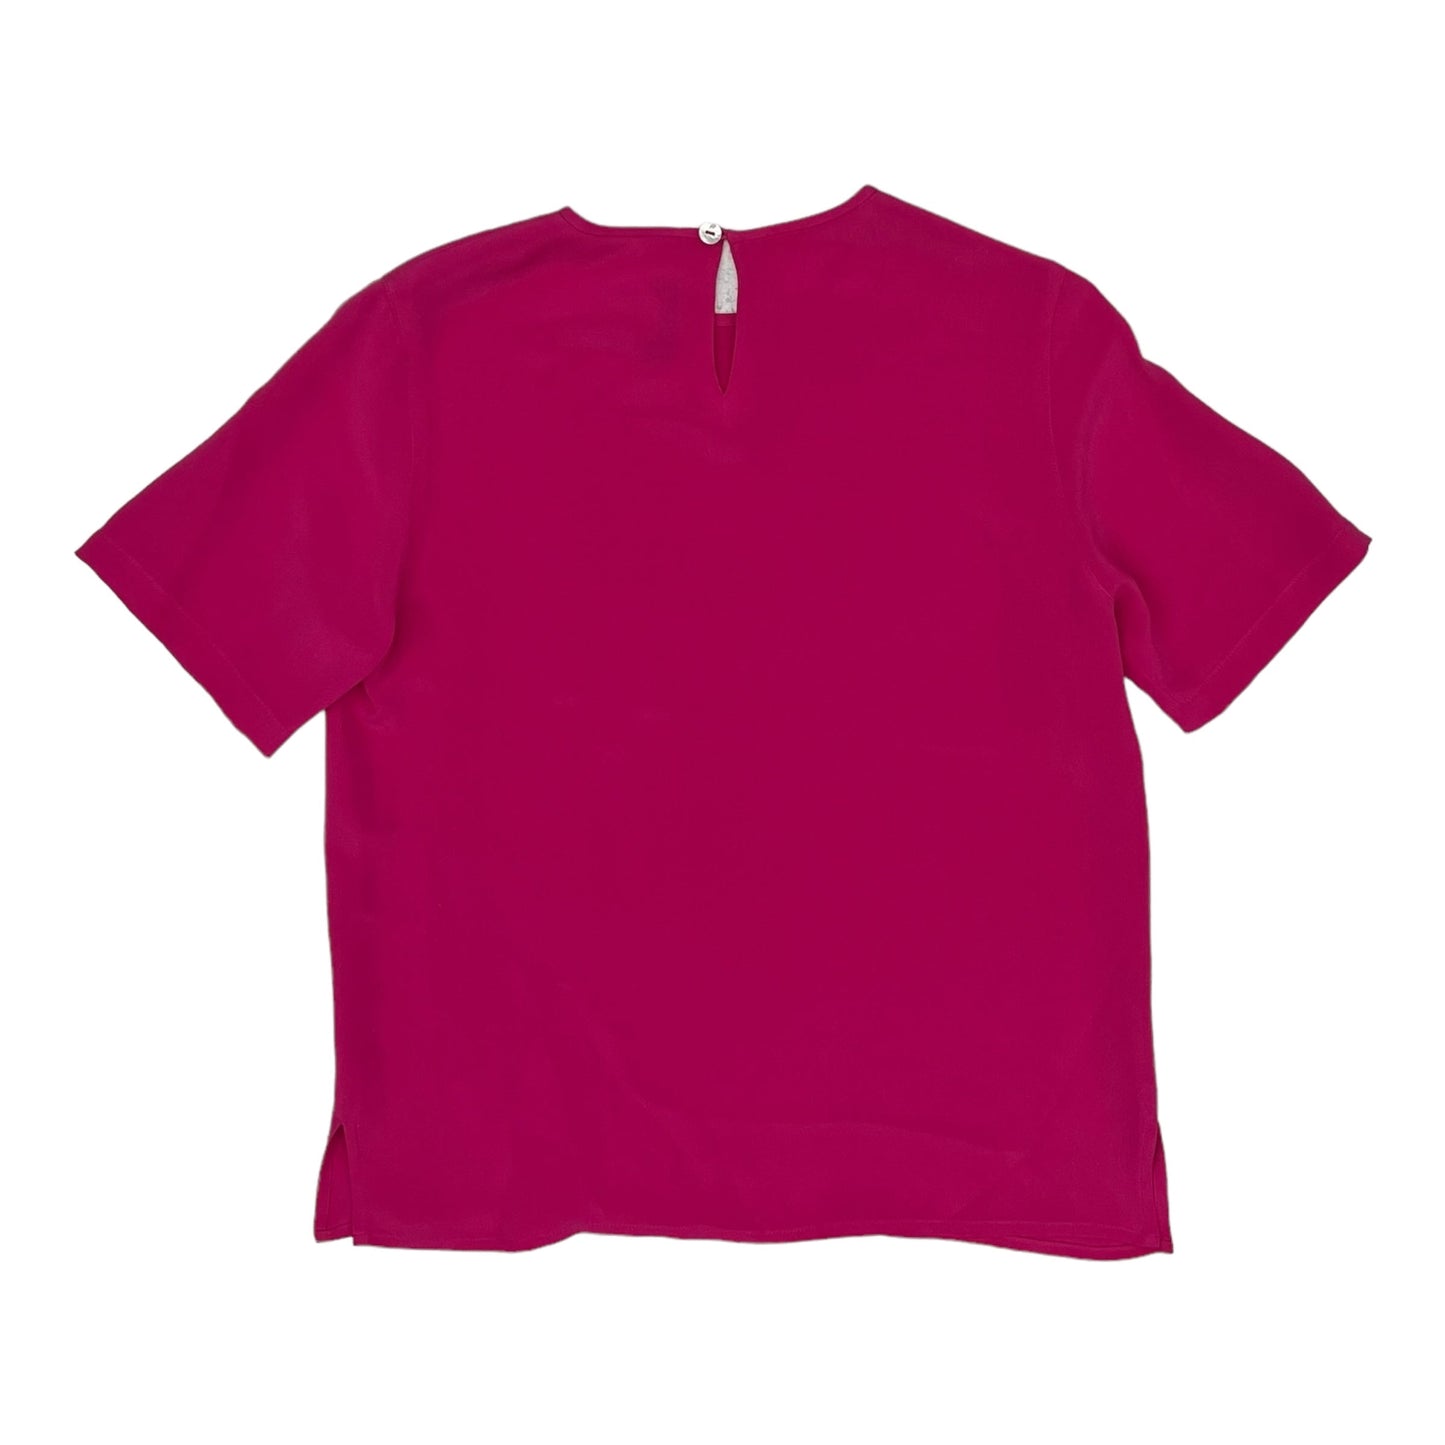 Top Short Sleeve By Clothes Mentor  Size: Petite